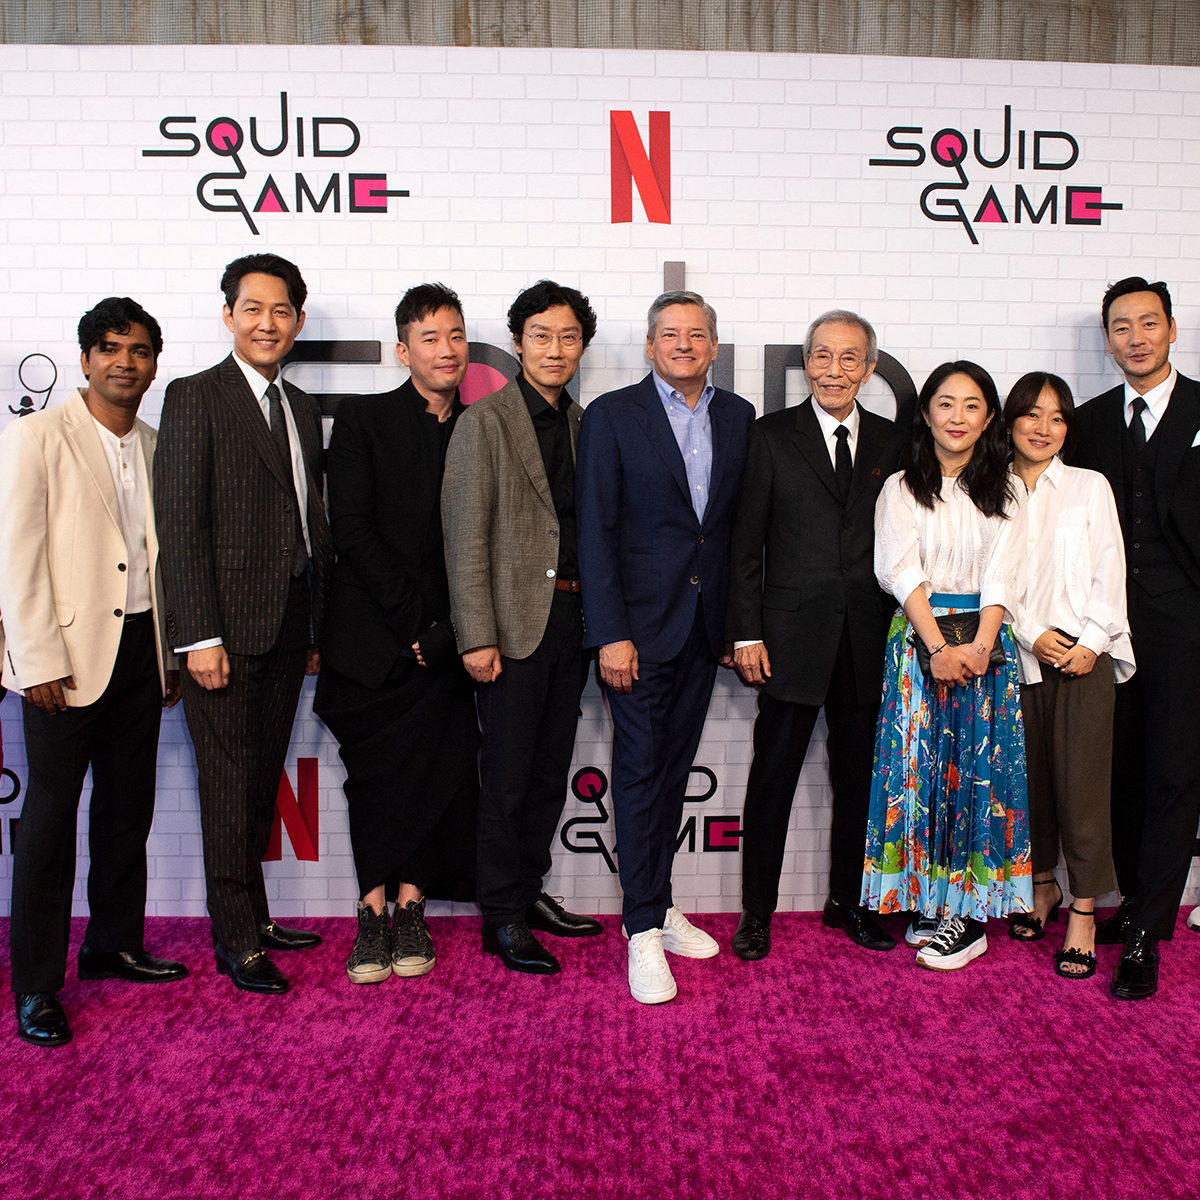 Squid Game' Season 2: Date, Spoilers, Plots, Cast, and More News